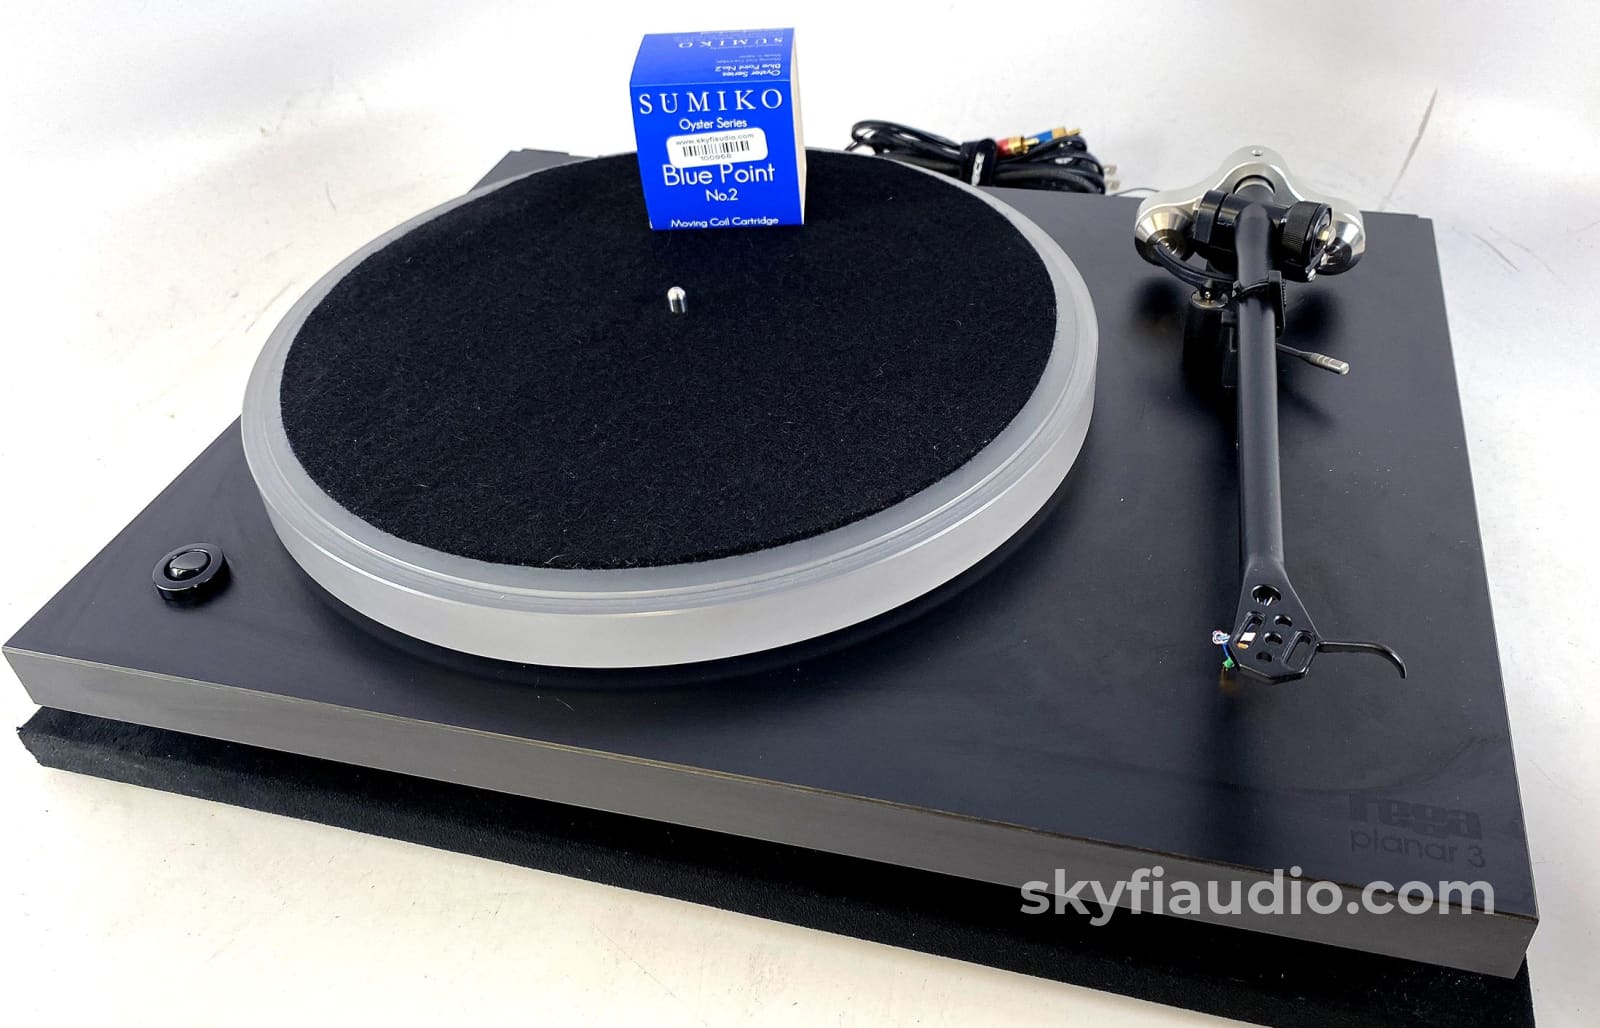 Rega Planar 3 with Tons of Upgrades and New Sumiko Blue Point No. 2